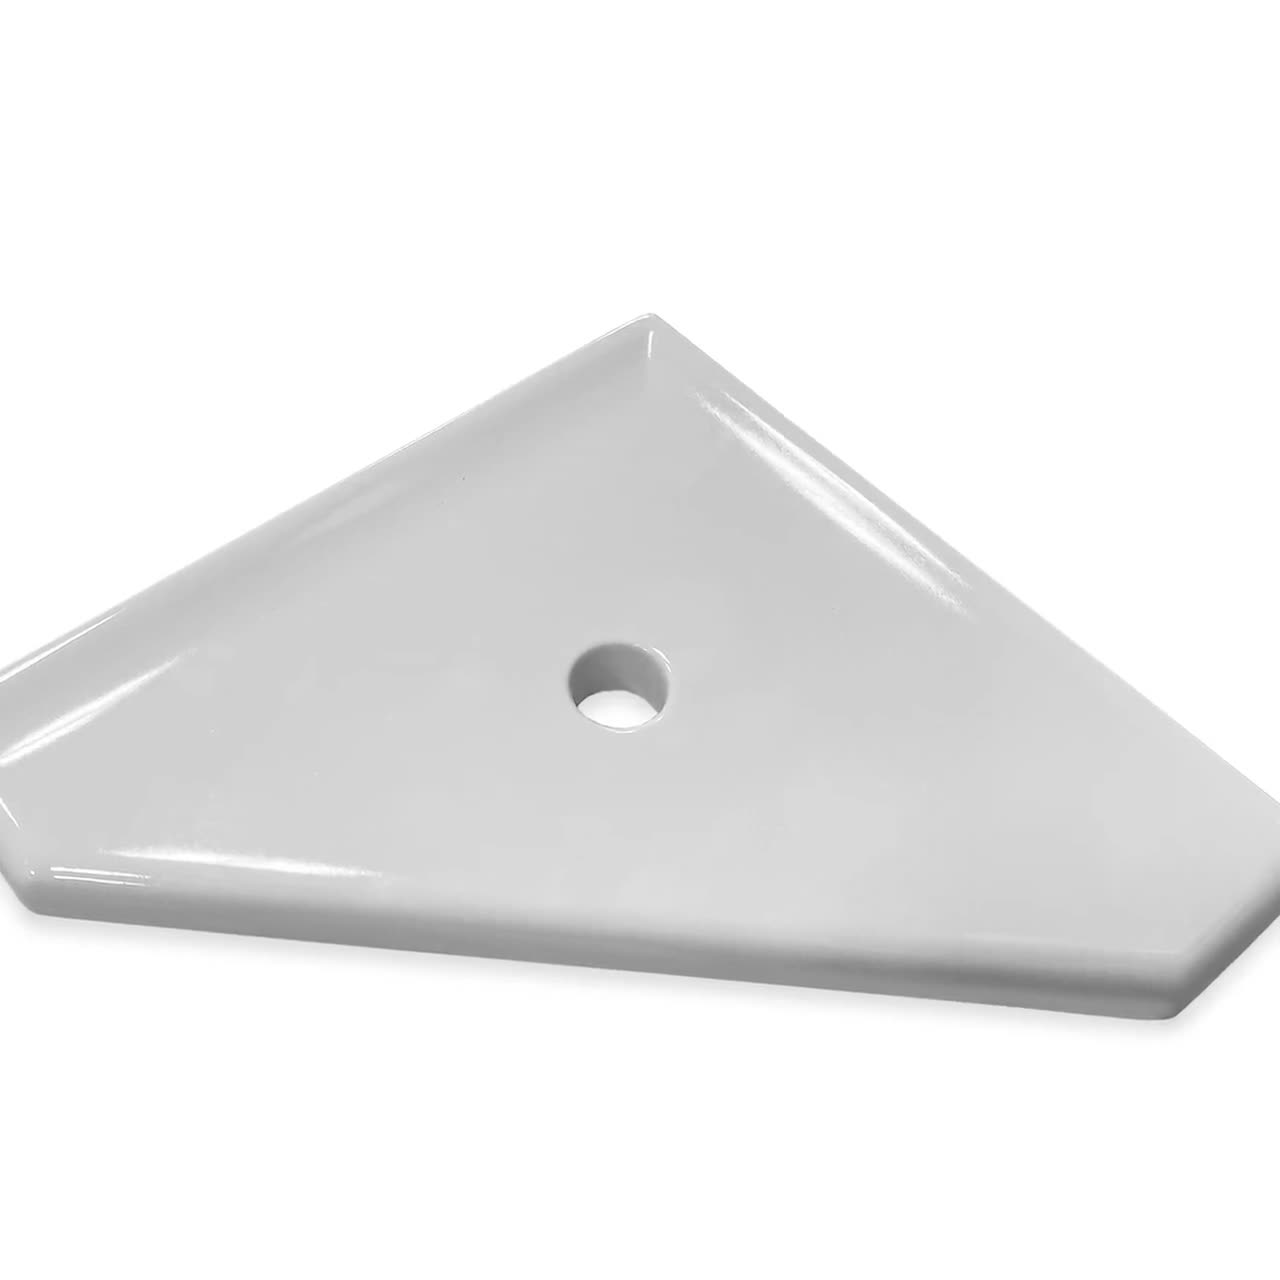 8 Polished White Ceramic Corner Shelf Elegant Shower Shelf With a Drain  Hole two Sided Tapes Included 